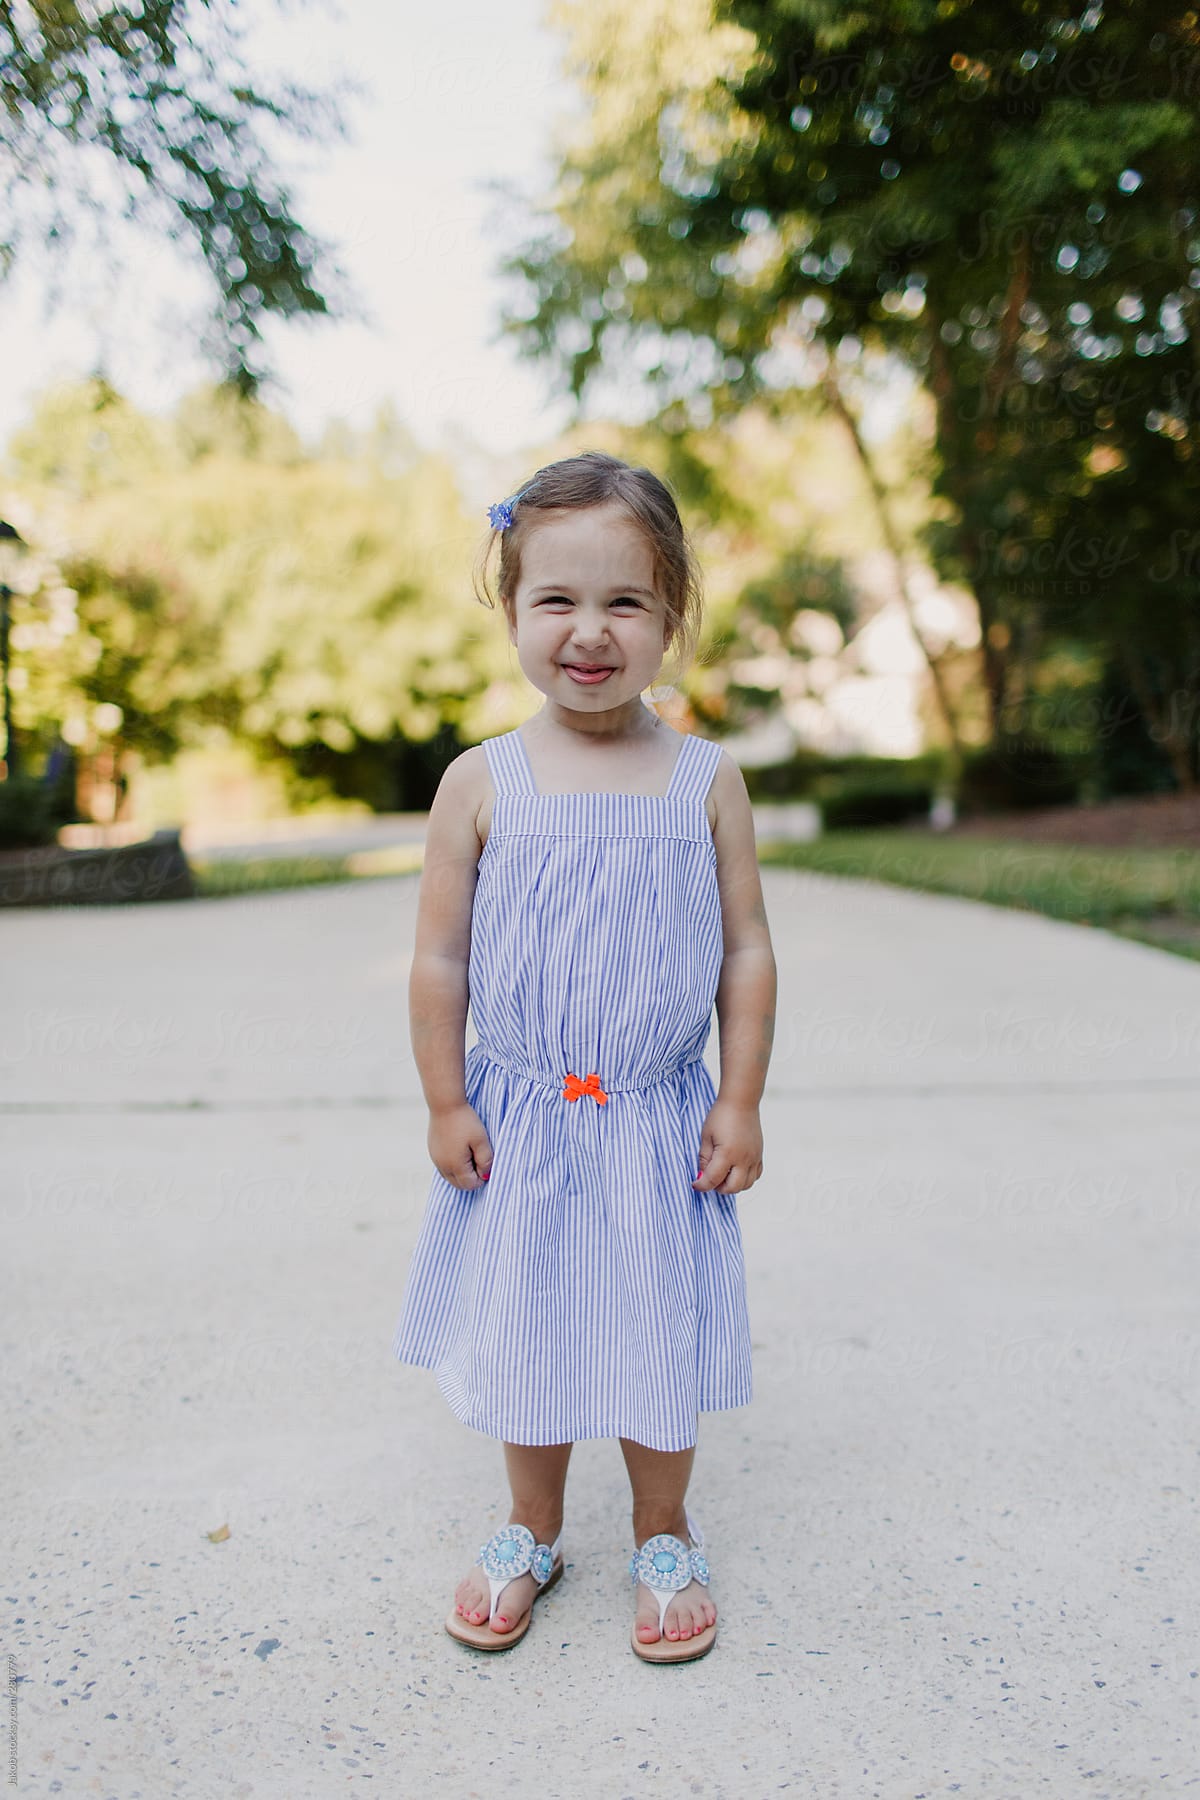 Trendy and happy toddler in a cute dress